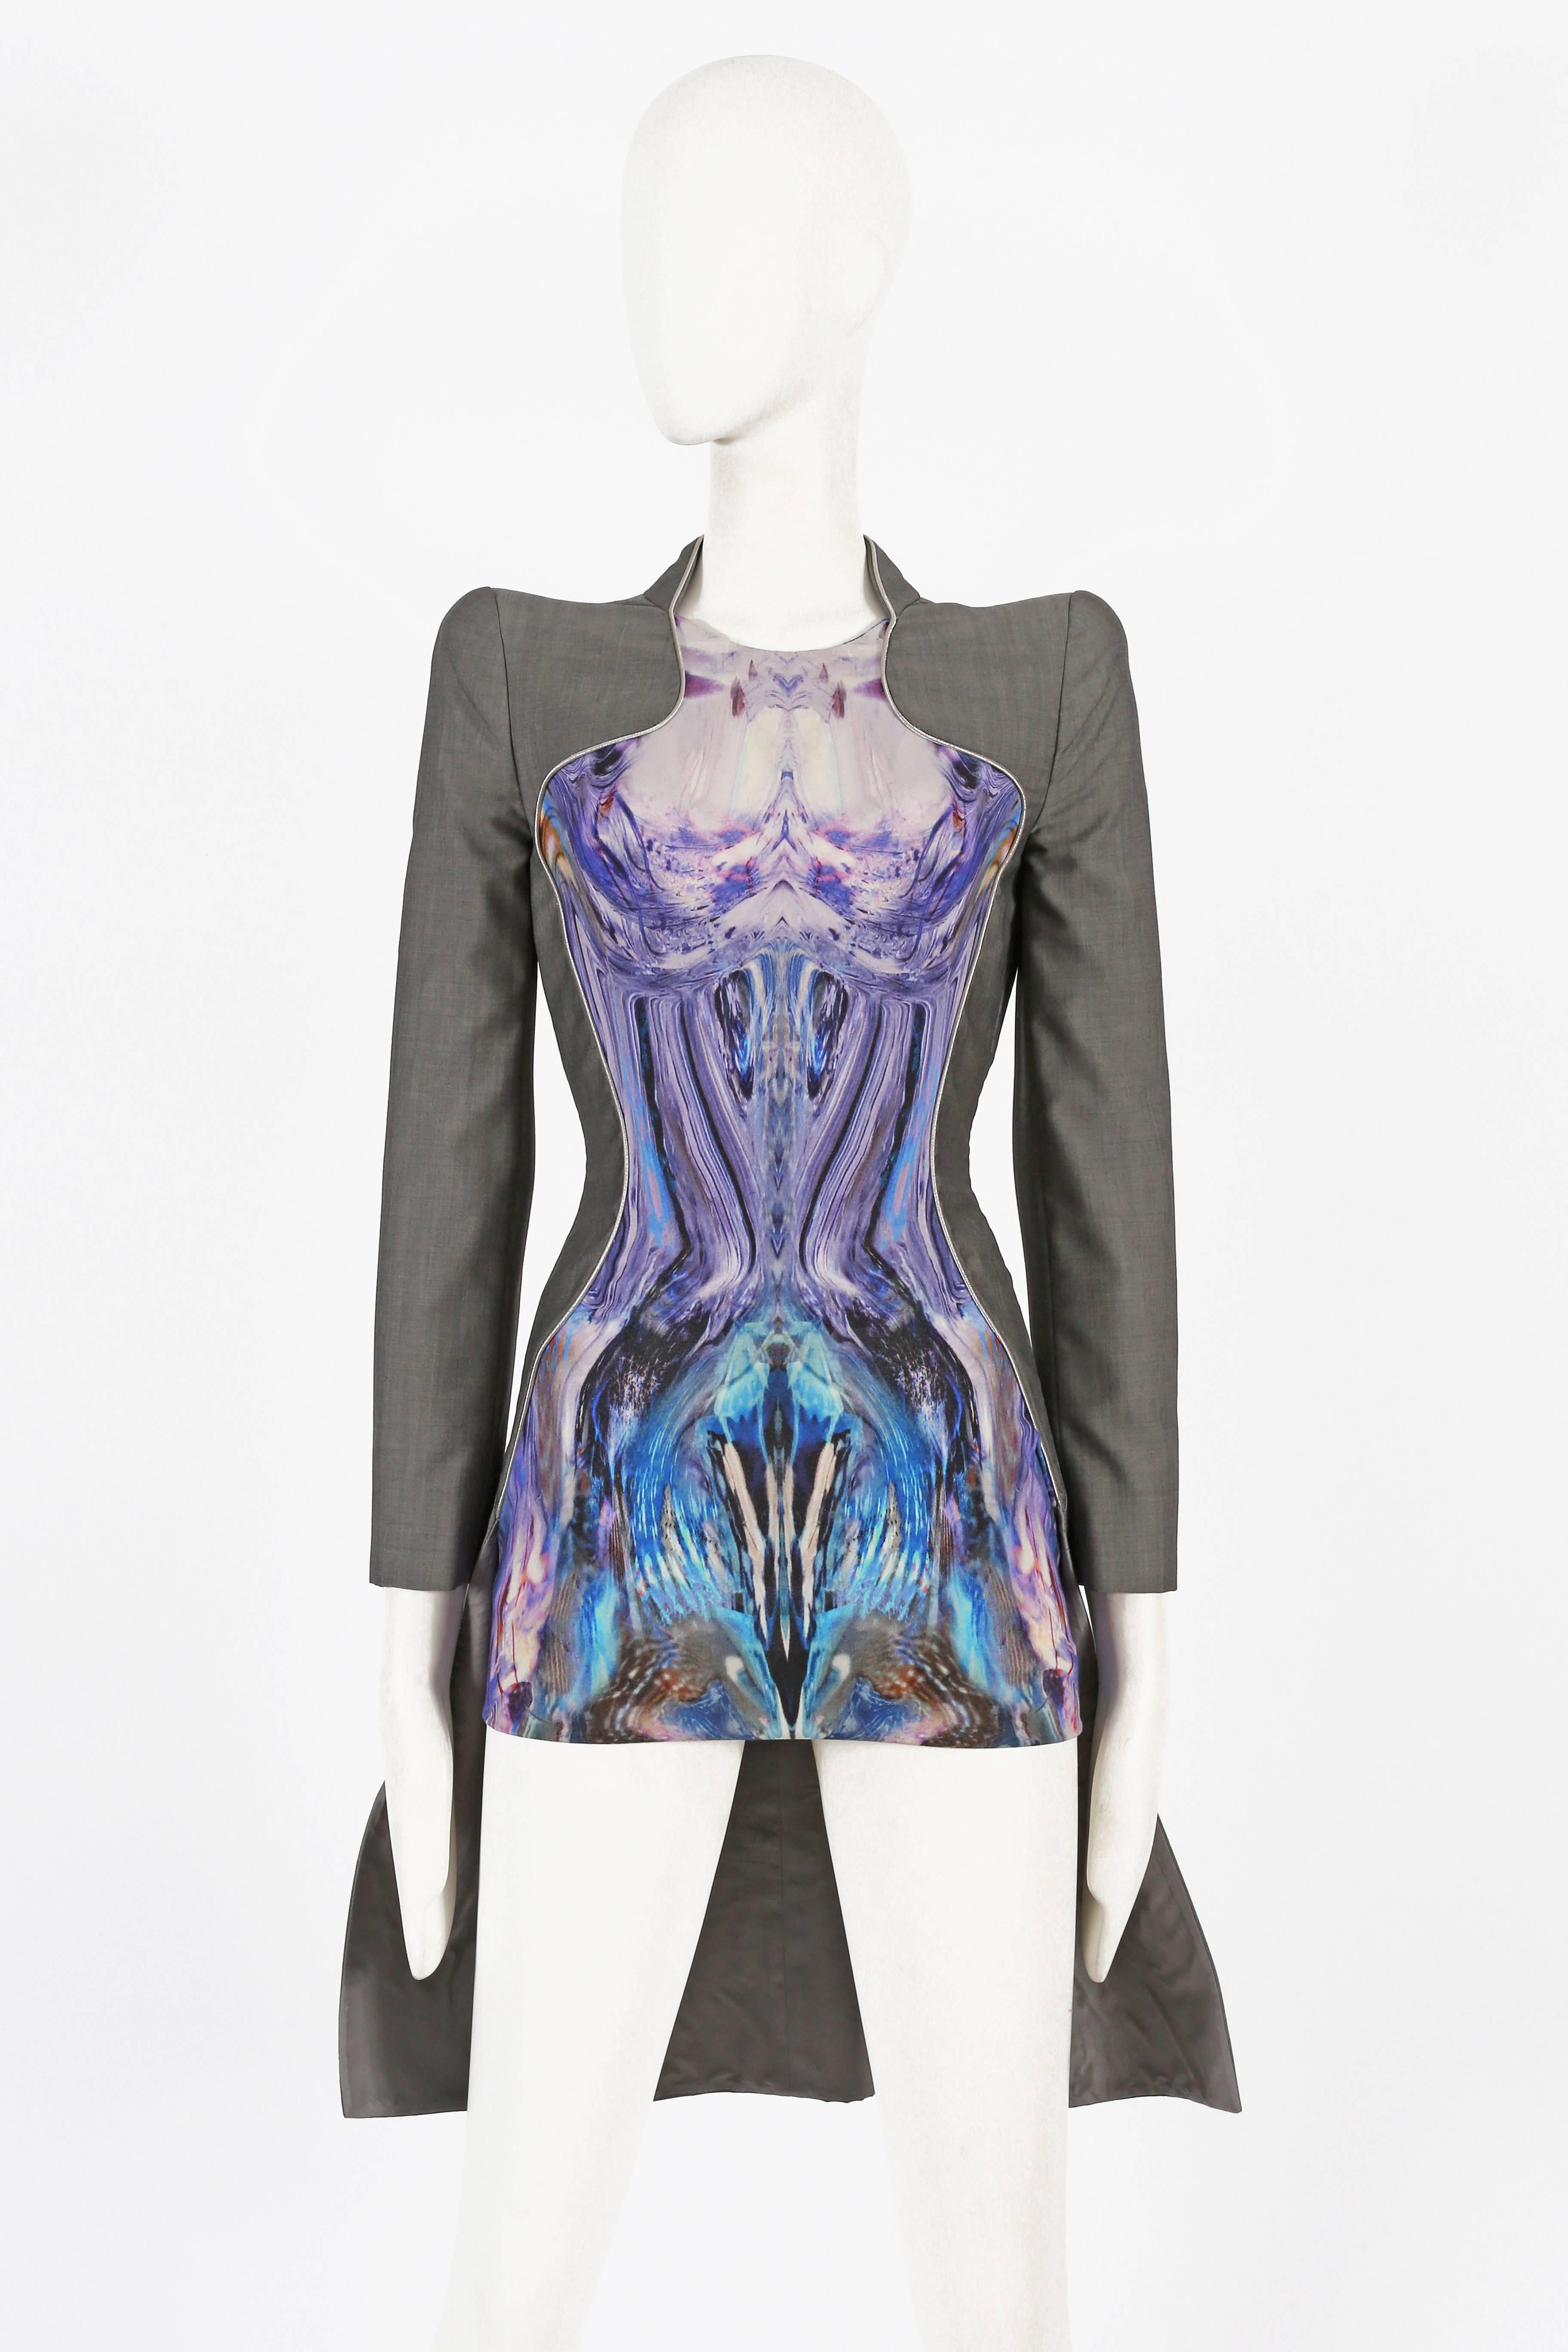 Extremely rare Alexander McQueen mini dress from his last collection 'Plato's Atlantis' Spring/Summer 2010. The dress features sharp tailoring throughout, padded shoulders, metallic piping and a digitally mirrored print of Jellyfish on a knitted